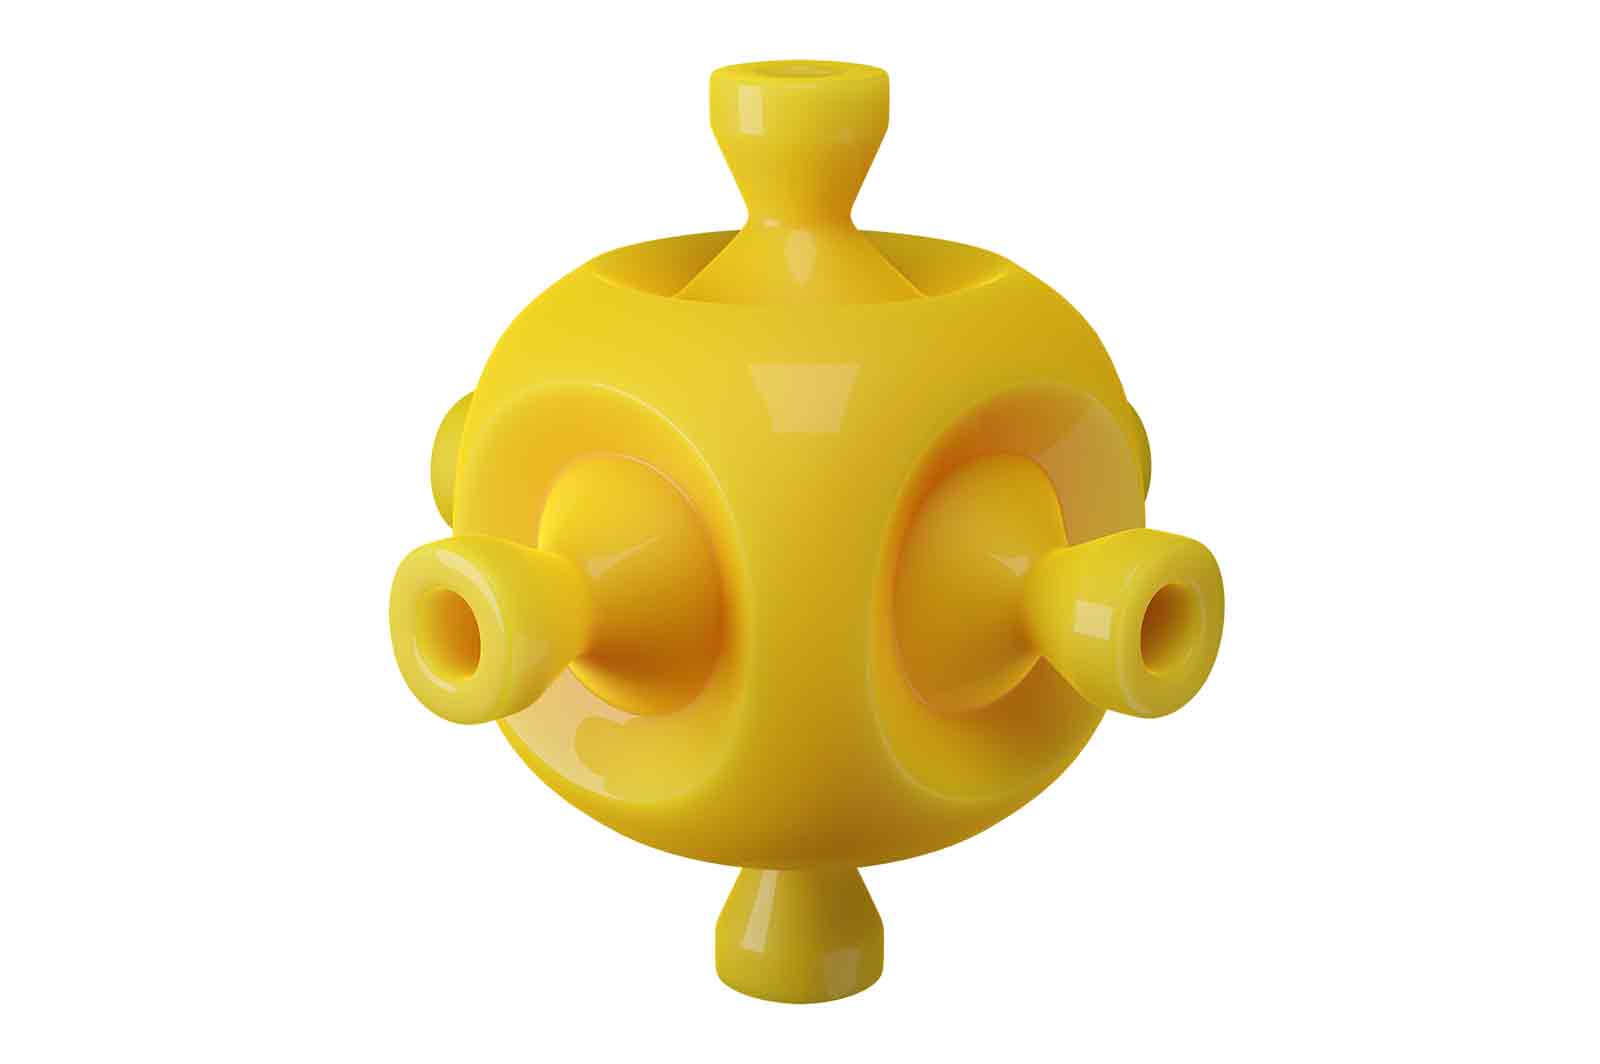 Abstract bright yellow plastic detail 3d rendered illustration. Component of mechanism concept